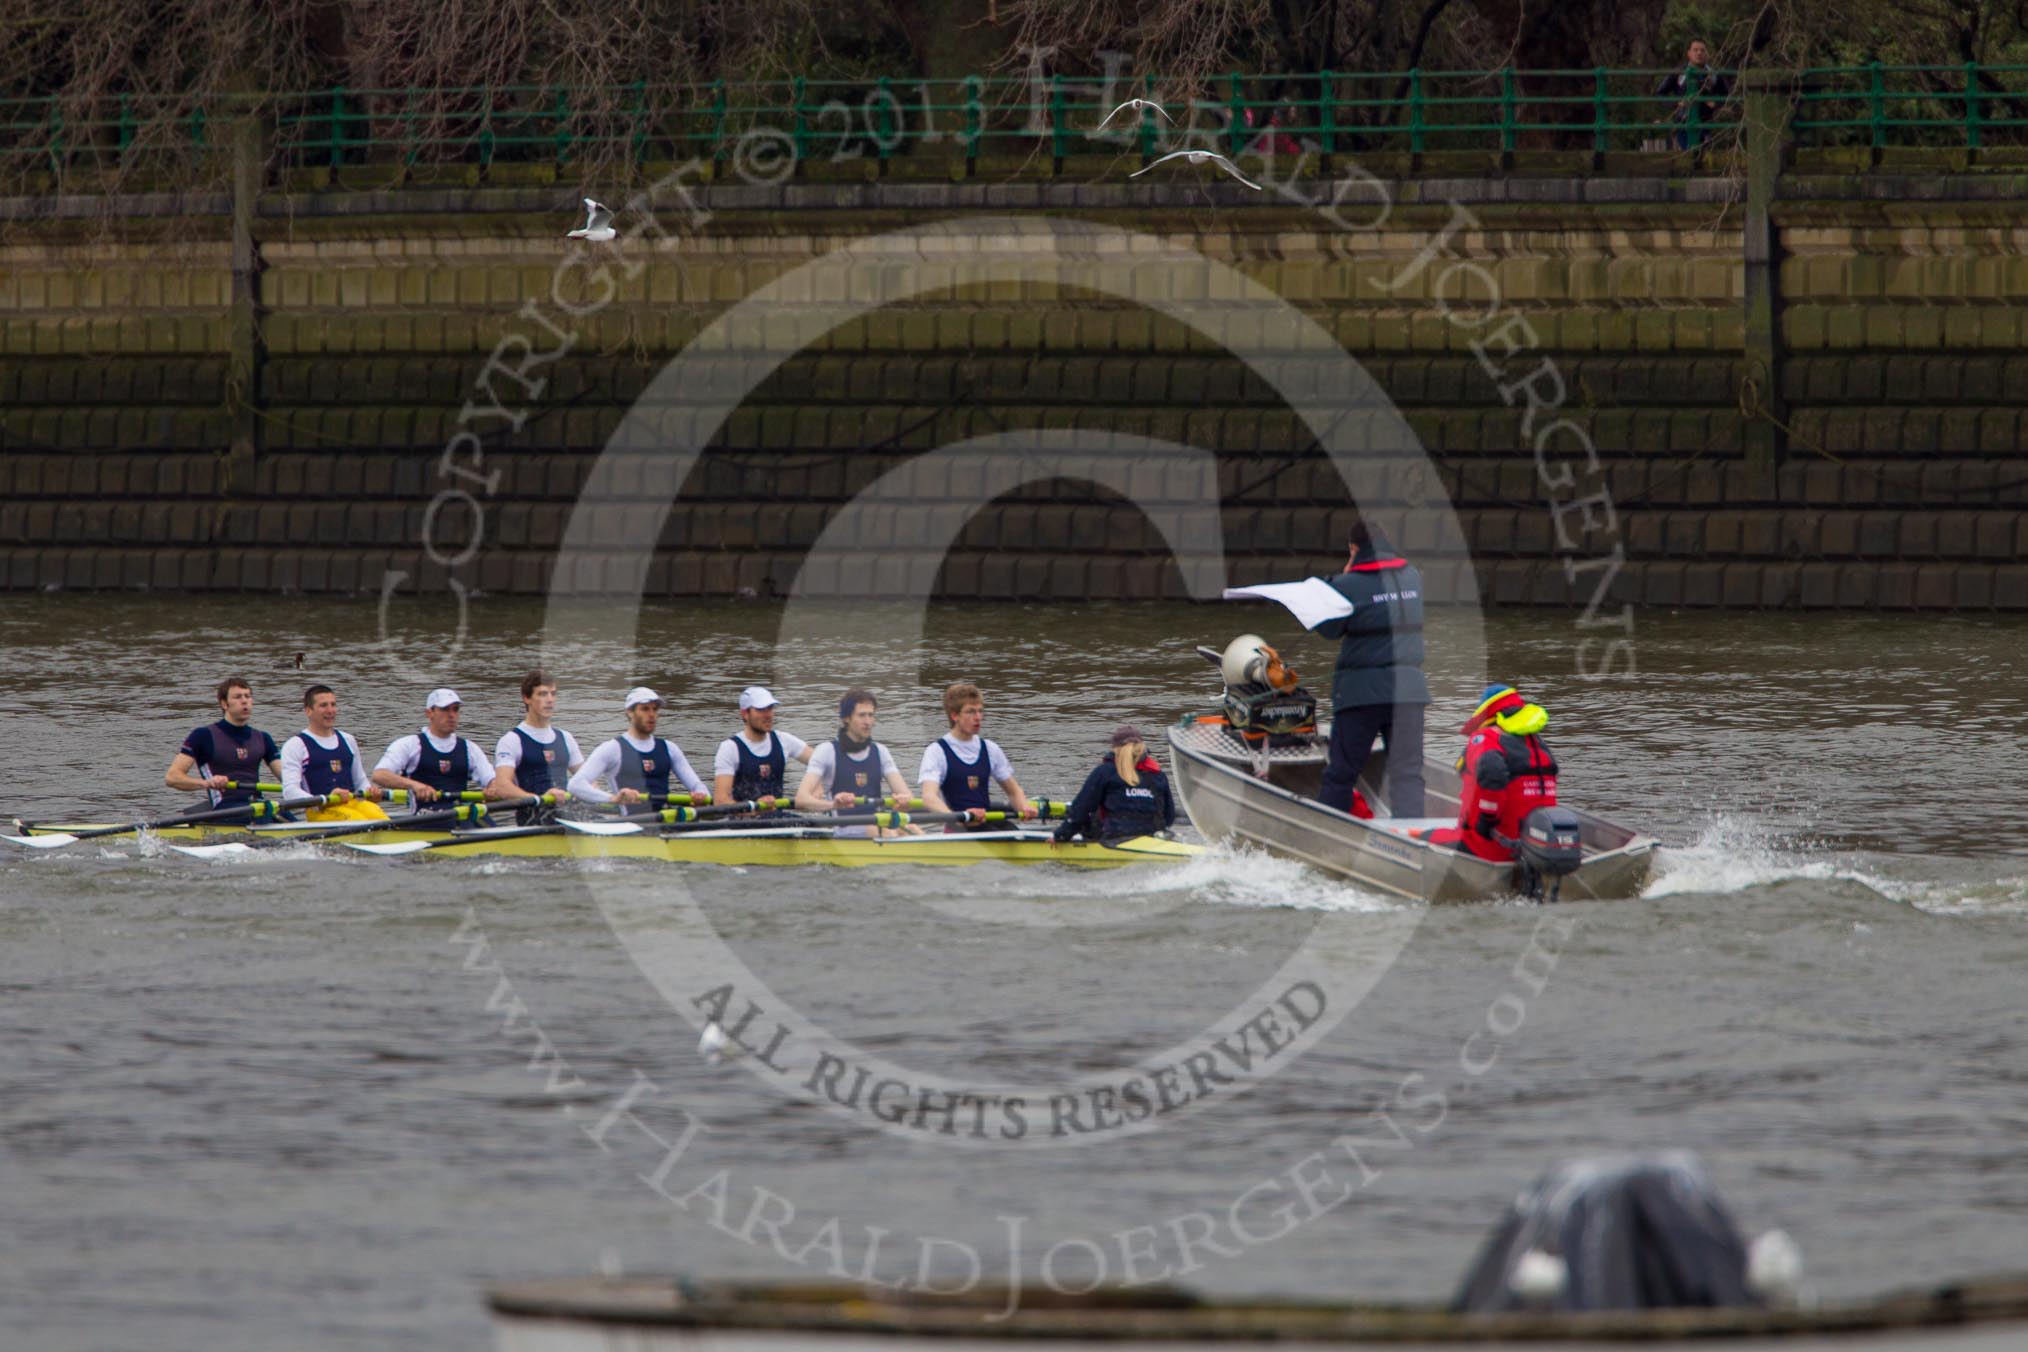 The Boat Race season 2013 - fixture CUBC vs Molesey BC, Goldie vs London RC.
Tideway,
London SW15,

United Kingdom,
on 16 March 2013 at 15:11, image #53